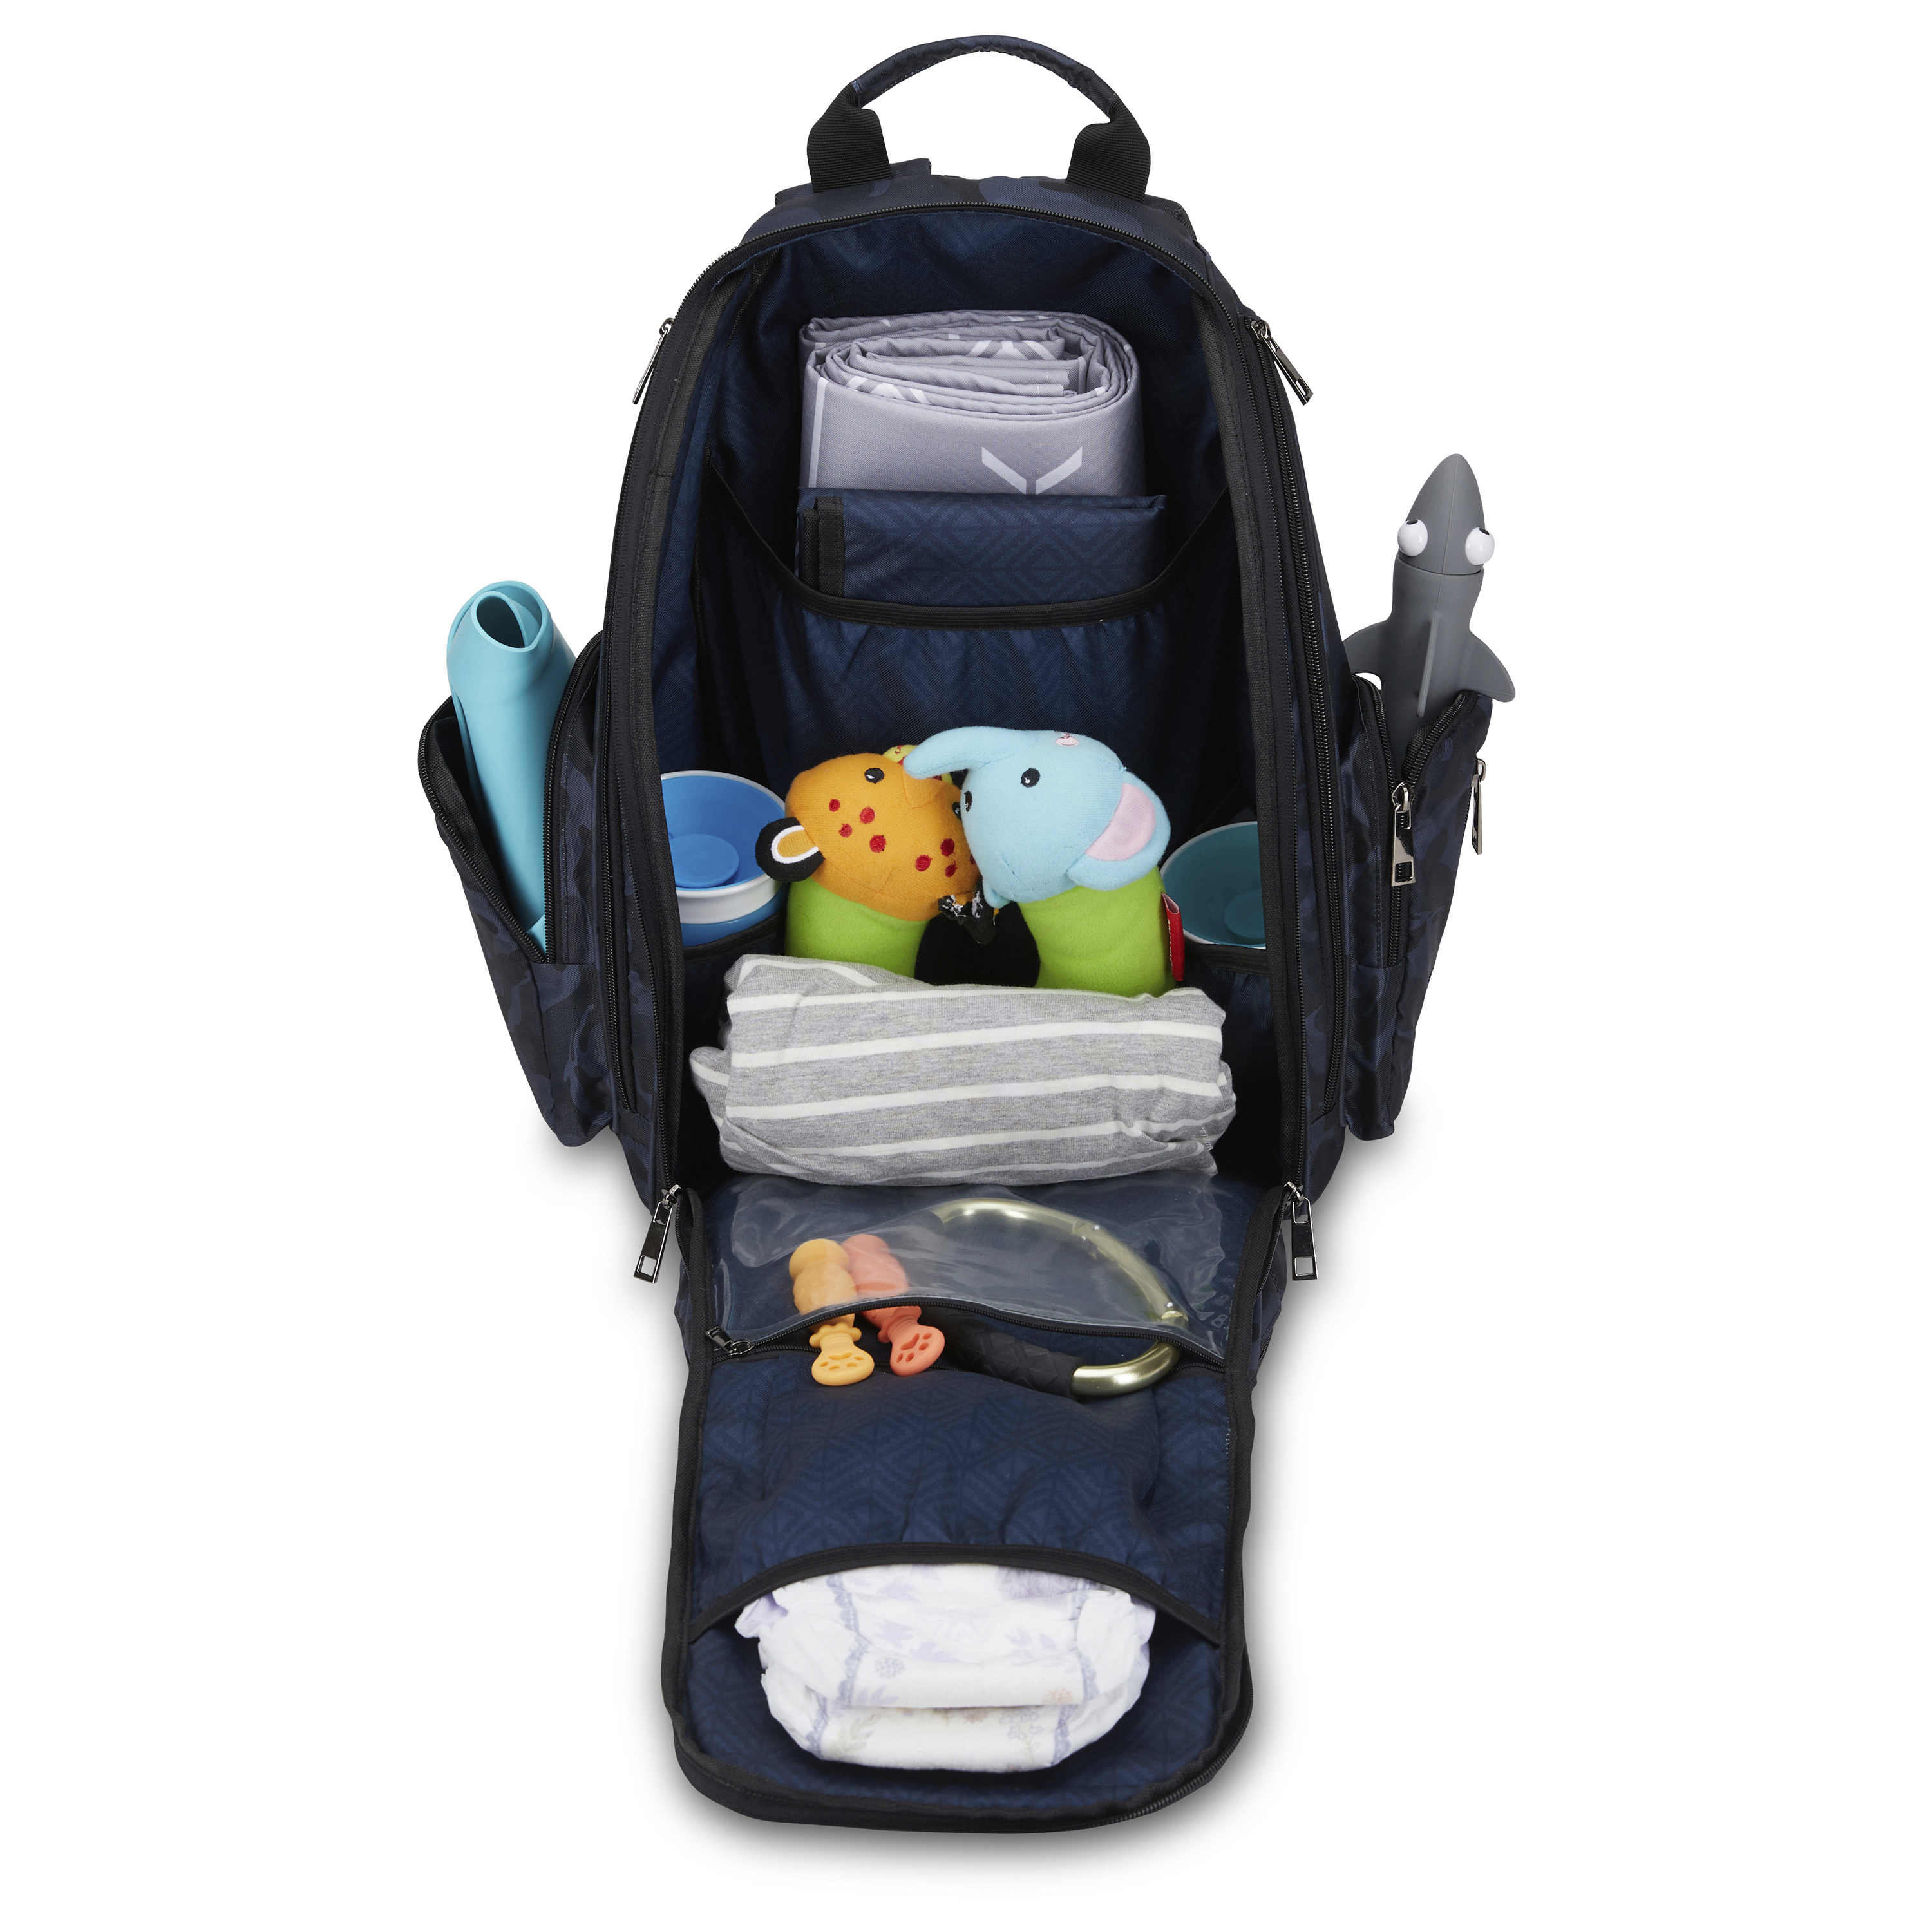 Monbebe Infant Diaper Bag Backpack with Changing Pad, Navy Camo - image 3 of 15